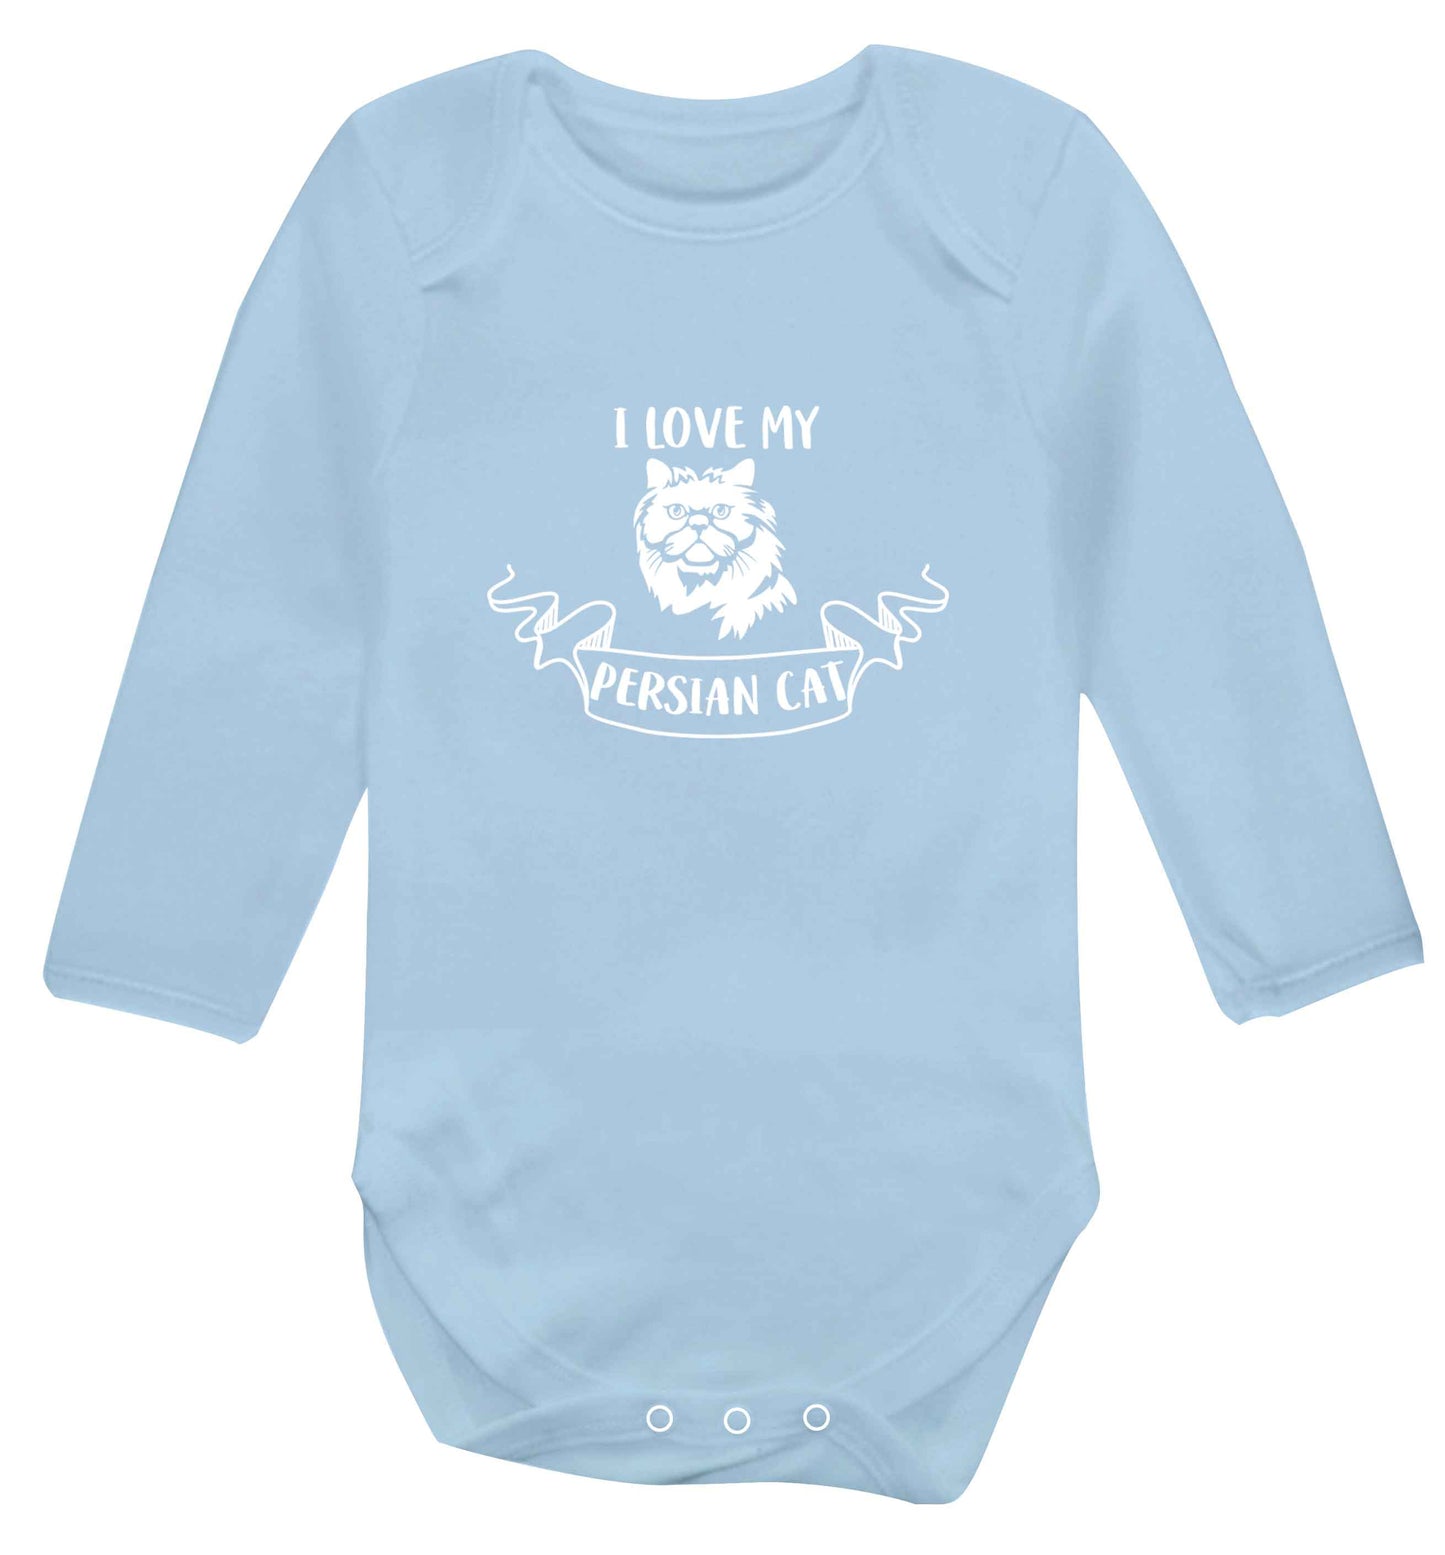 I love my persian cat baby vest long sleeved pale blue 6-12 months